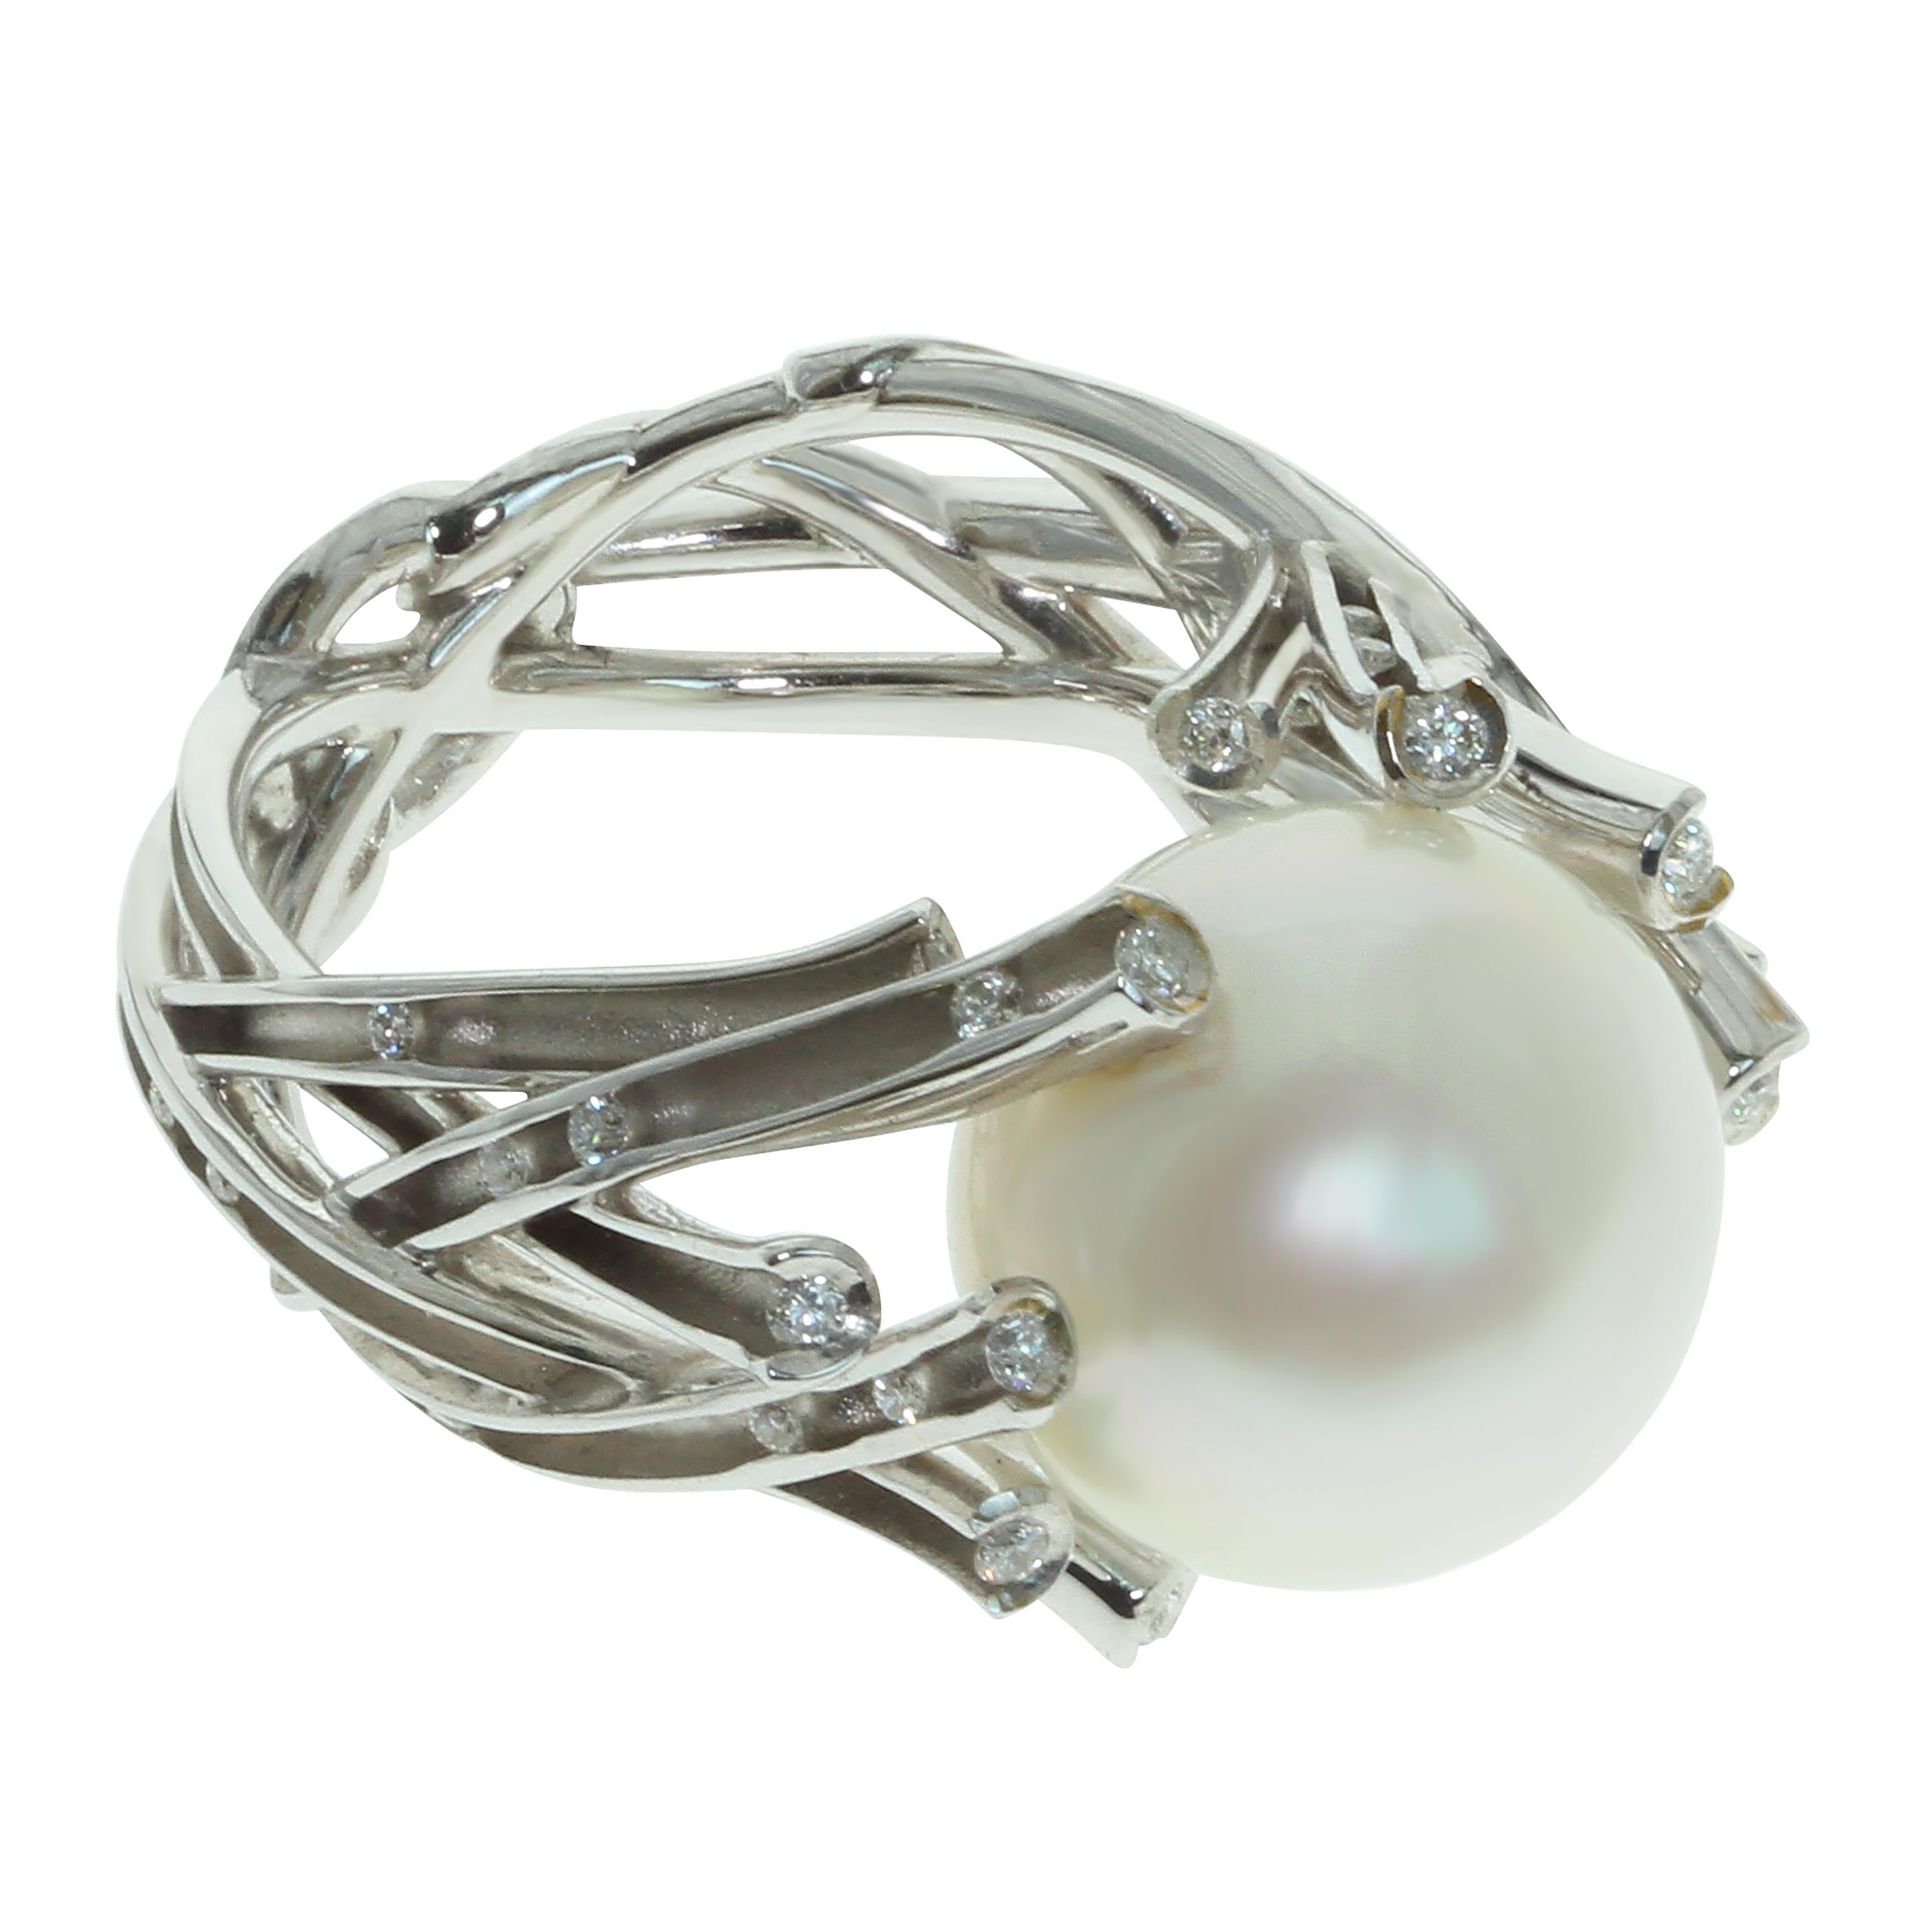 White South Sea Pearl Diamonds 18 Karat White Gold Ring
White 18 Karat Gold is made in the form of frozen brushwood, which glitters in the sun, 40 Diamonds add glitter to it. With its branches, brushwood holds White South Sea Pearl like a snowball.